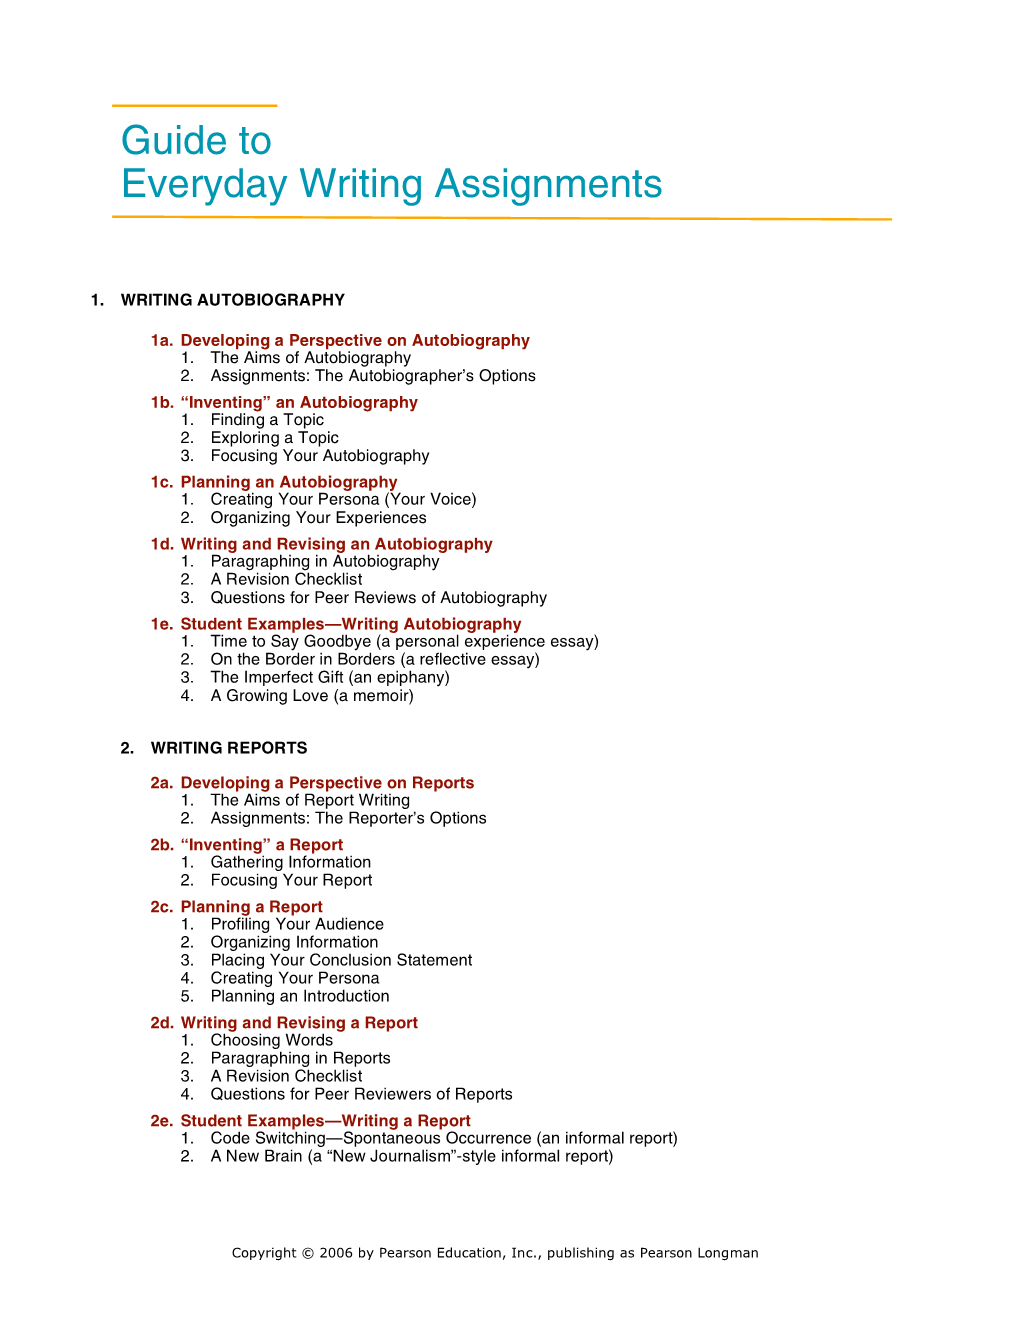 Guide to Everyday Writing Assignments